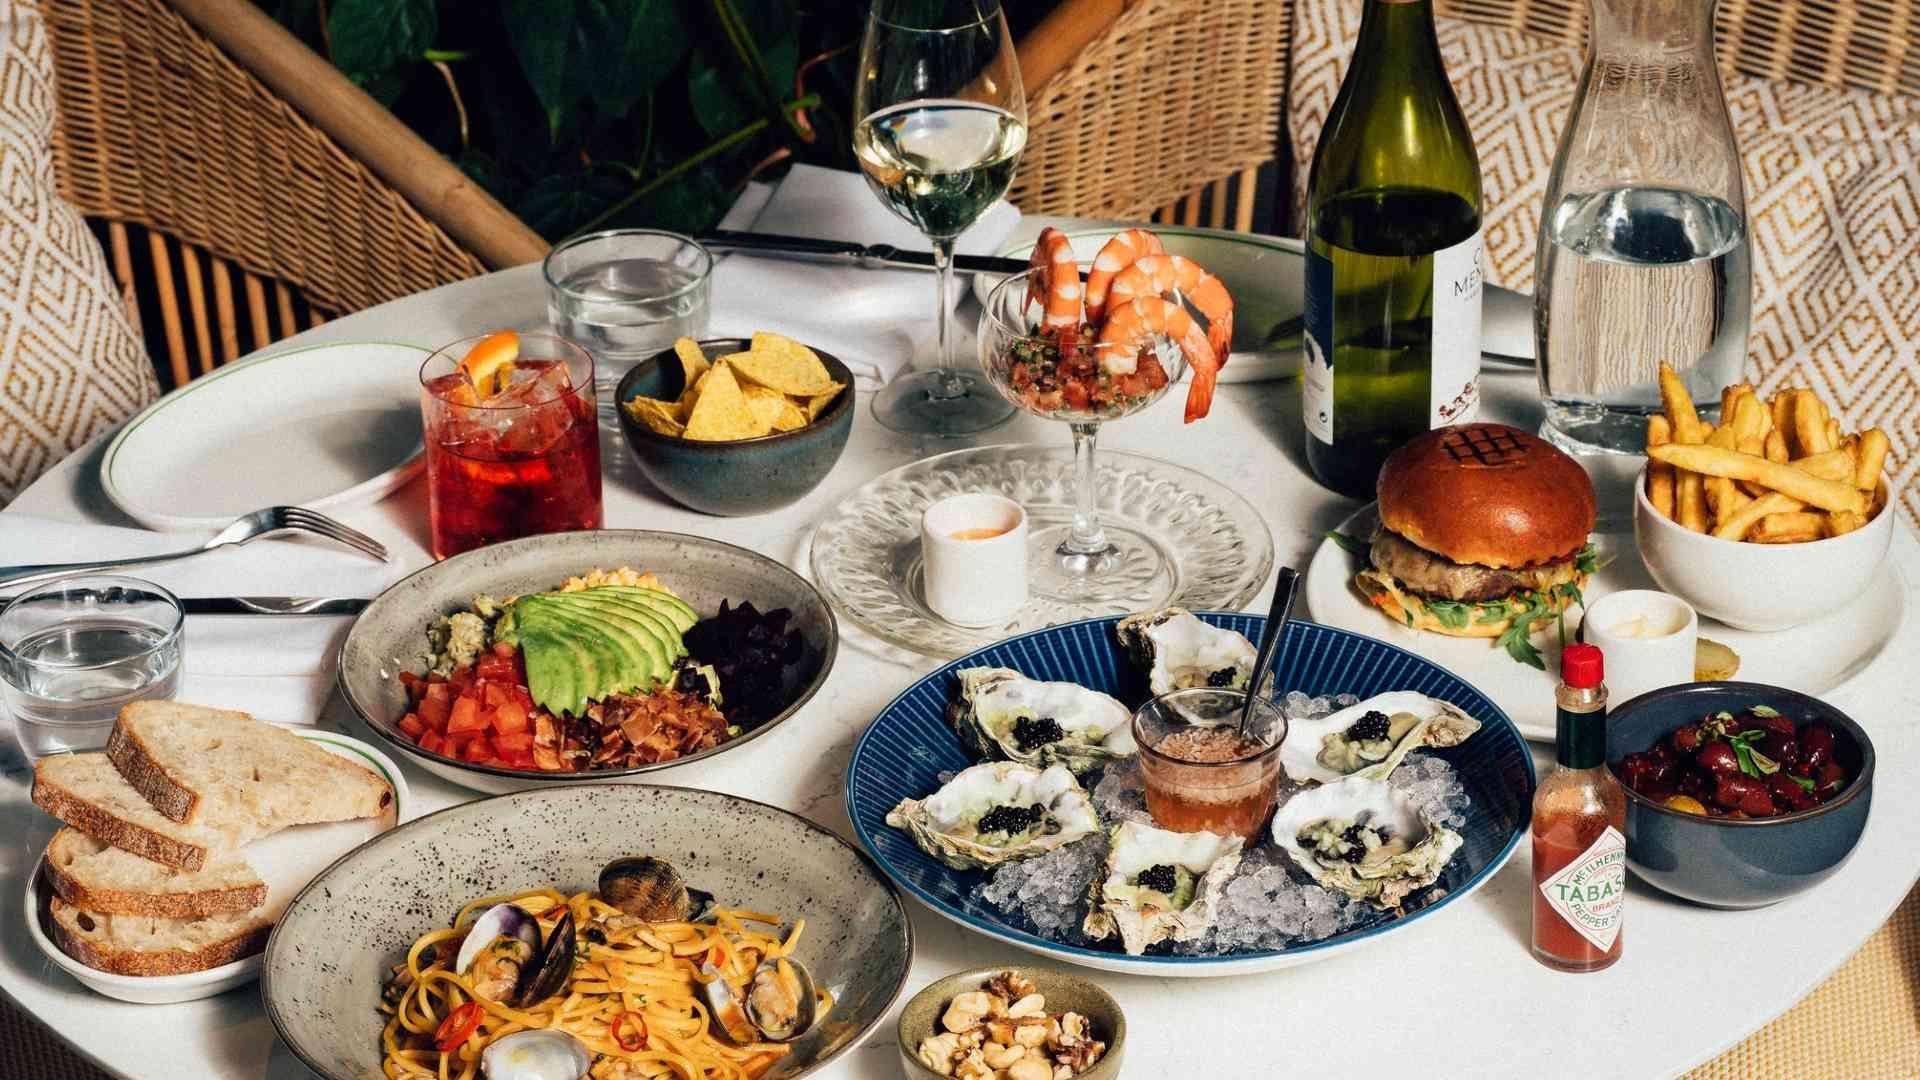 A table set with oysters, pasta, and other delicious food